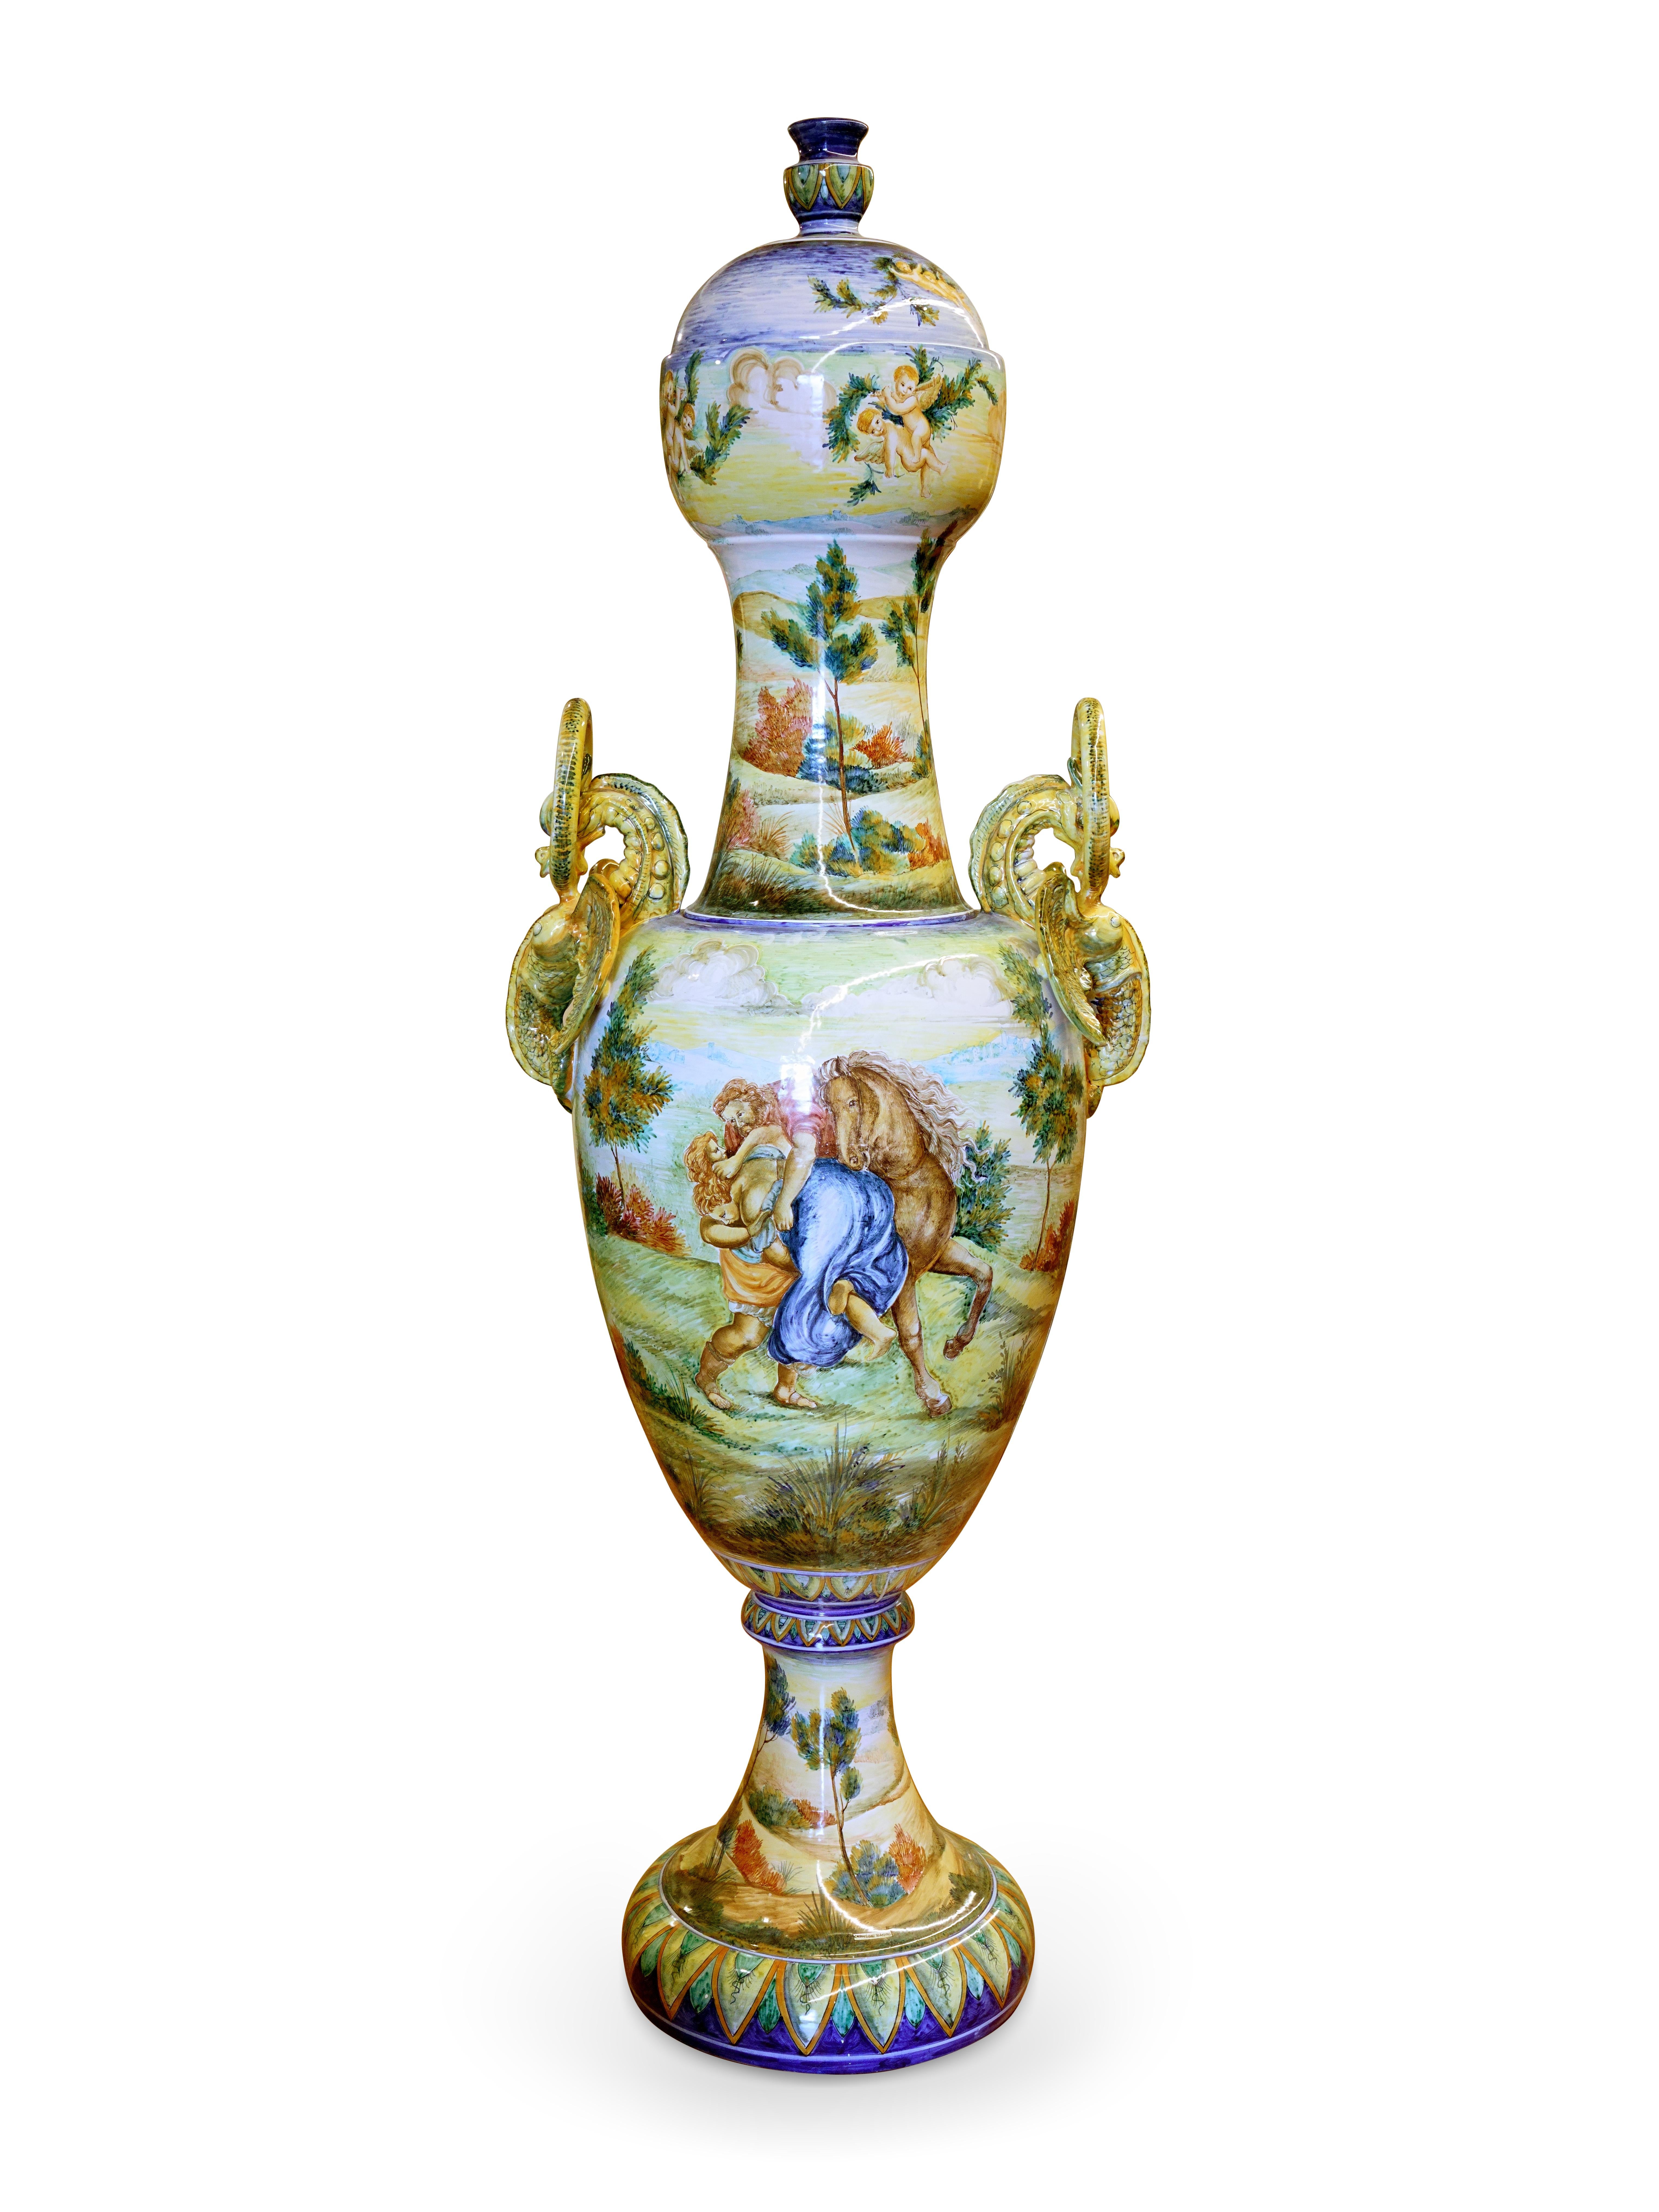 Majestic majolica Amphora vase, with a height of 200 cm (78,7 in) and a diameter of 70 cm (27,5 in): a unique piece, entirely handmade and hand-painted in Gubbio, Central Italy, in 1993. Its surface is decorated with a splendid and detailed